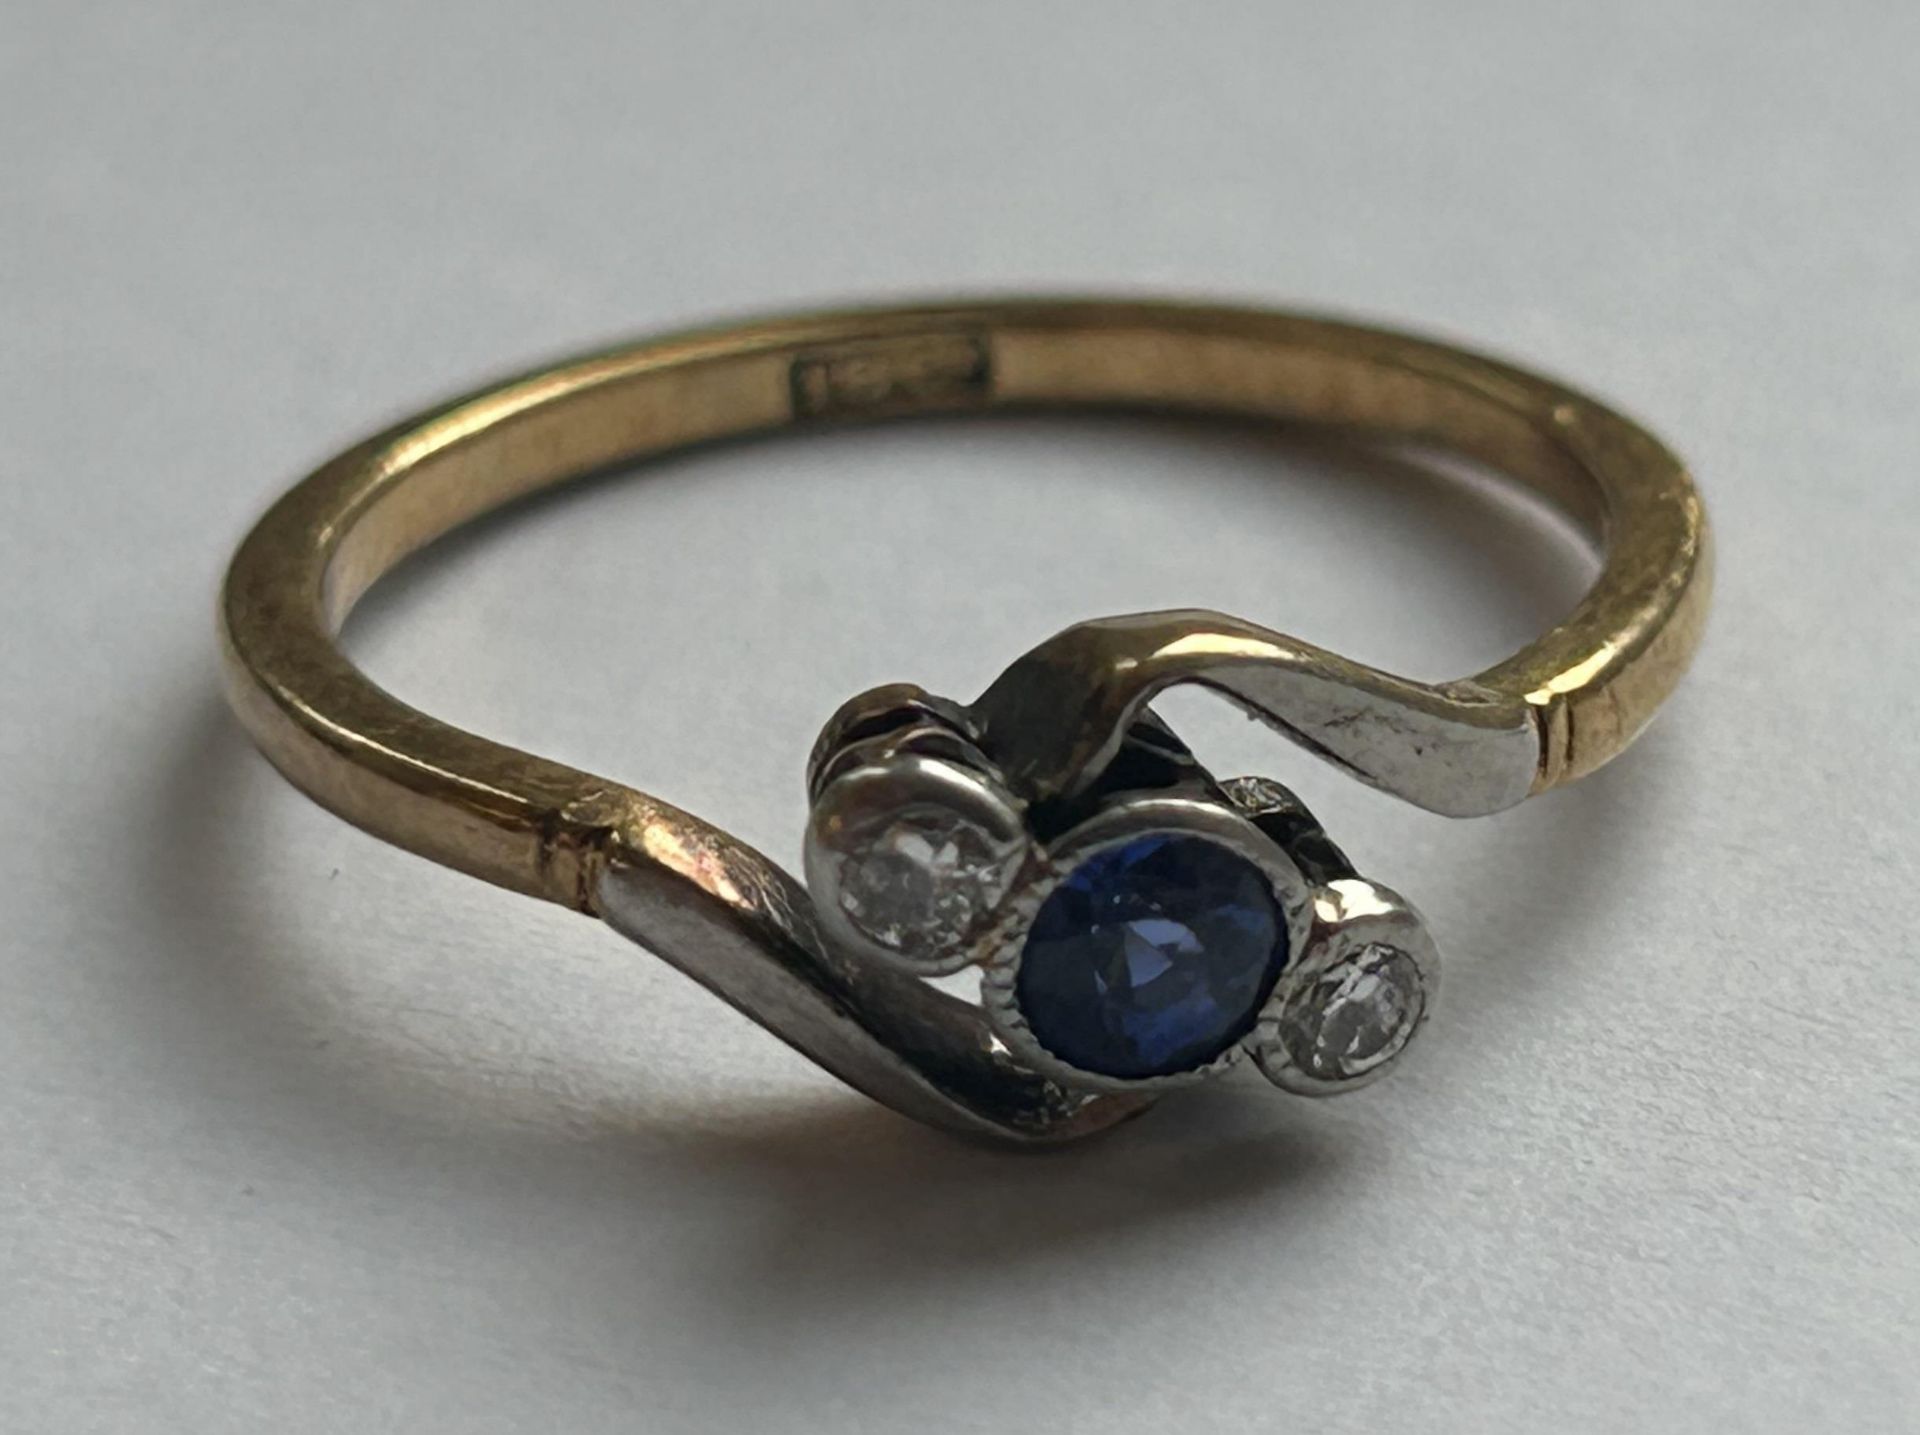 AN 18CT YELLOW GOLD AND PLATINUM, DIAMOND AND SAPPHIRE CROSSOVER RING SIZE L, WEIGHT 2.26 GRAMS